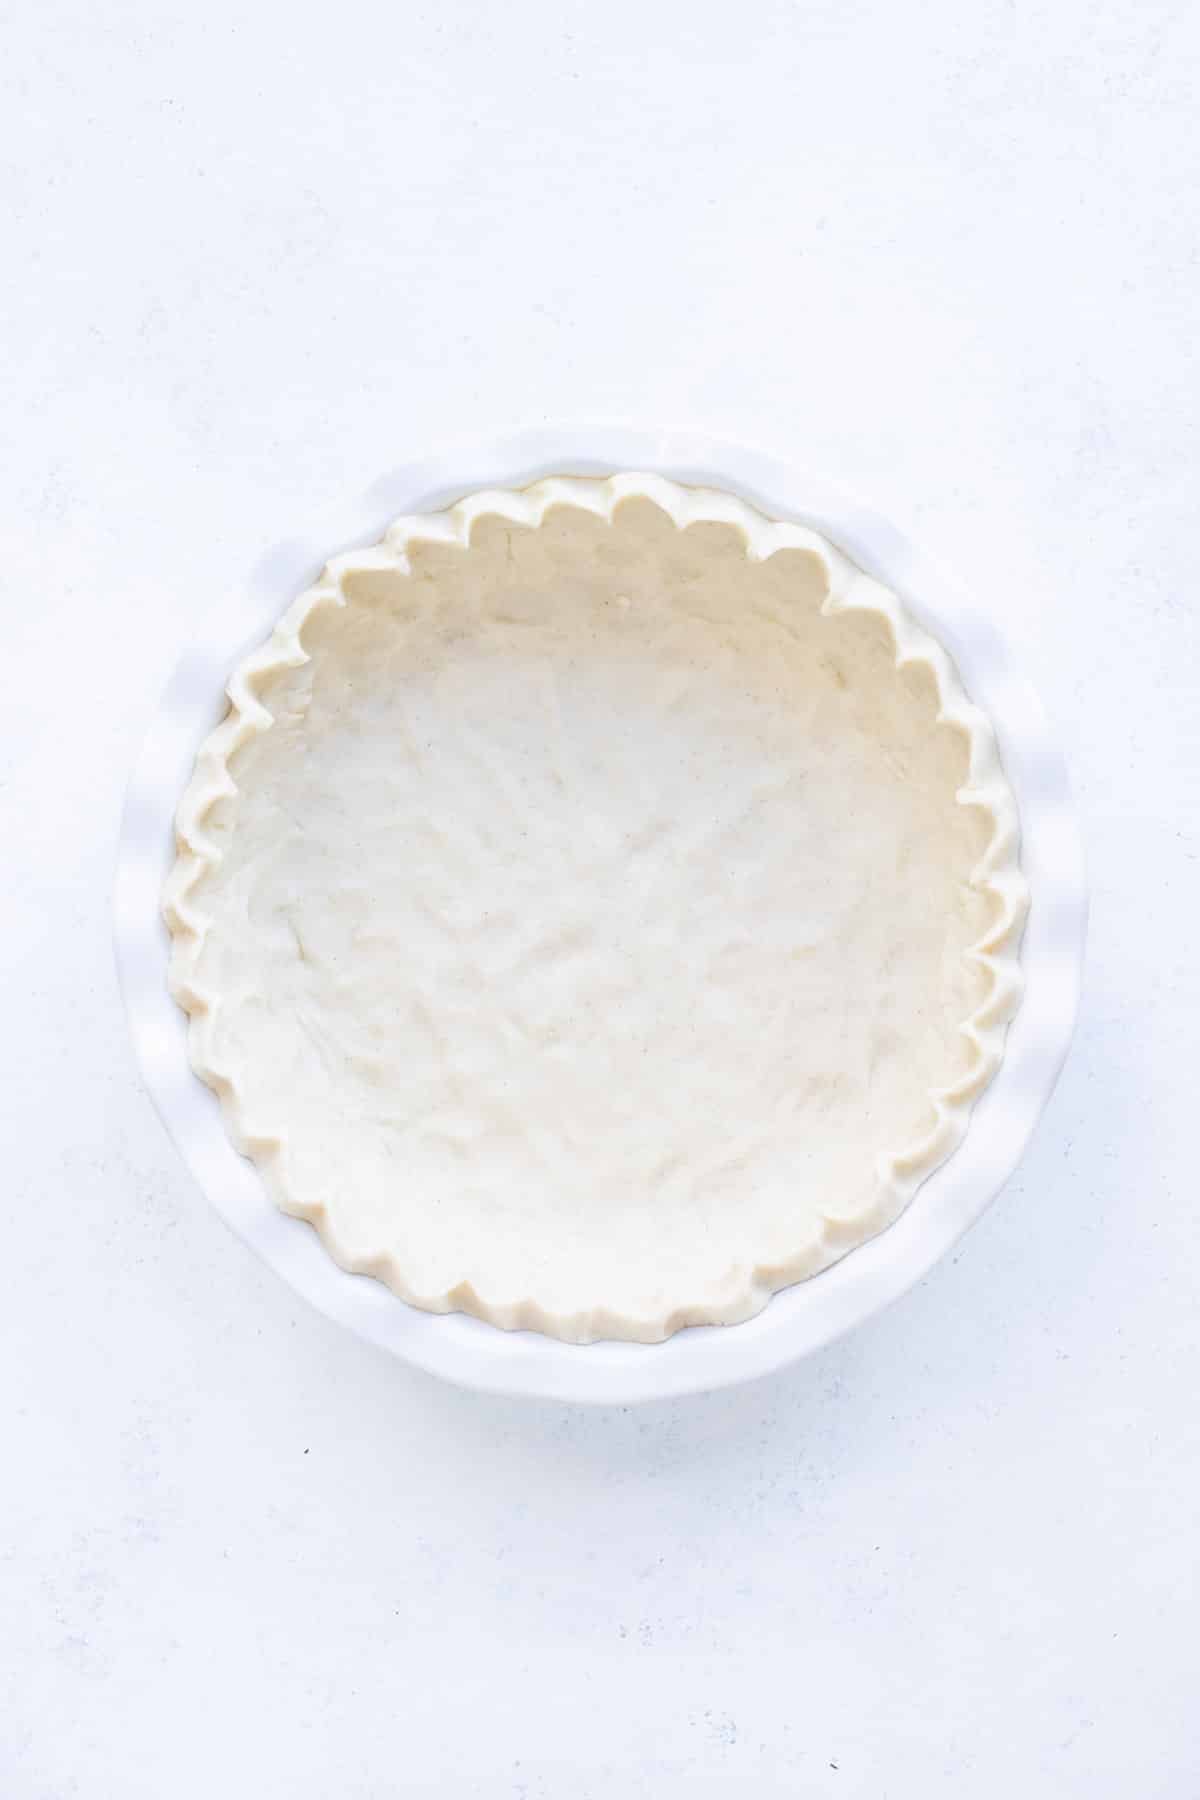 A pie dish has a crust with crimped edges ready to be filled.